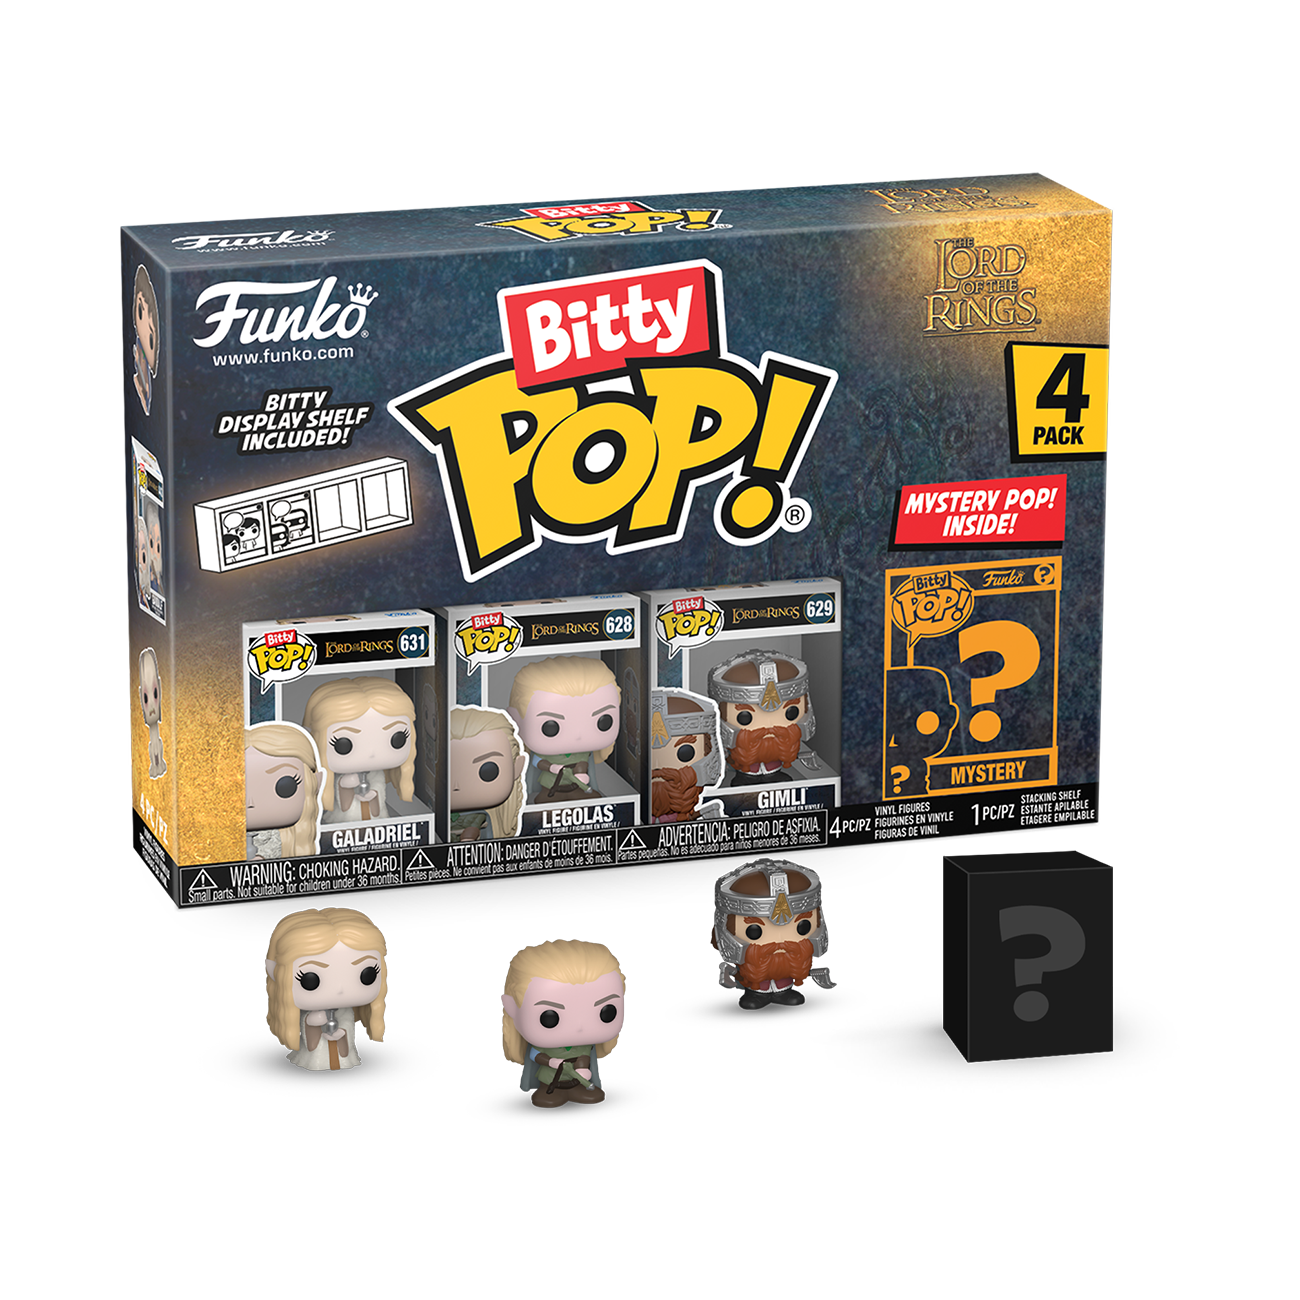 Funko BITTY POP! The Lord Of The Rings 4-Pack Series 2